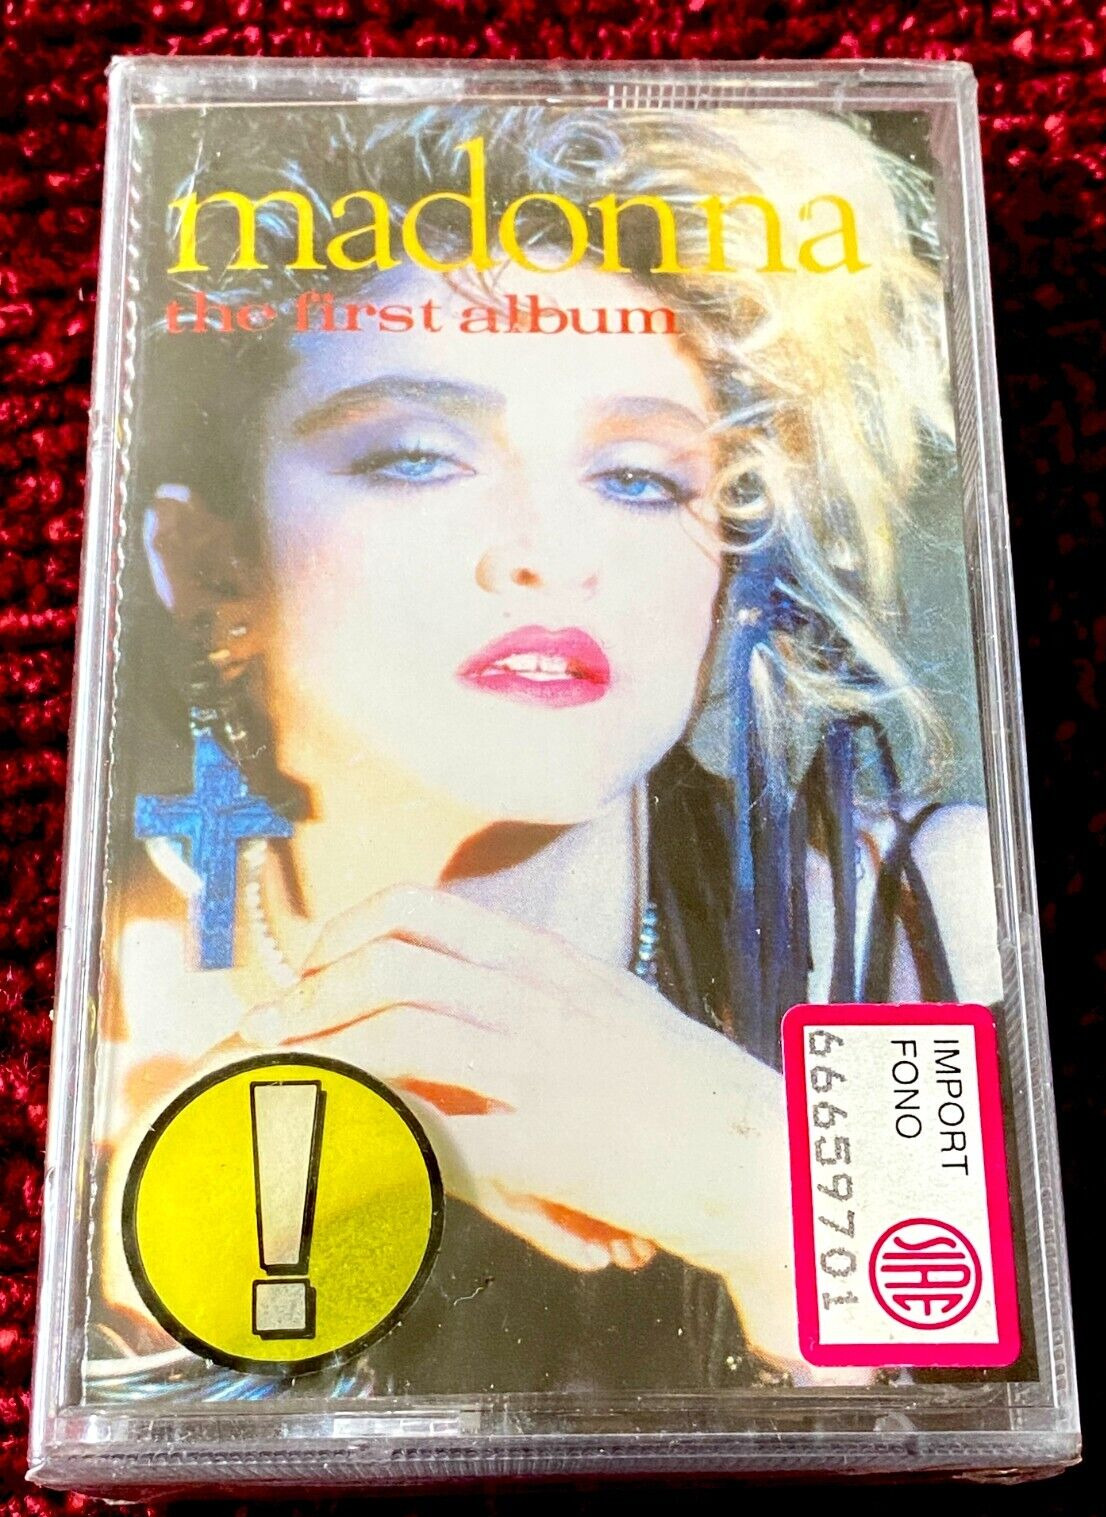 MADONNA SEALED THE FIRST ALBUM SEALED EUROPE PRICE IMPORT STICKER FONO HOLIDAY